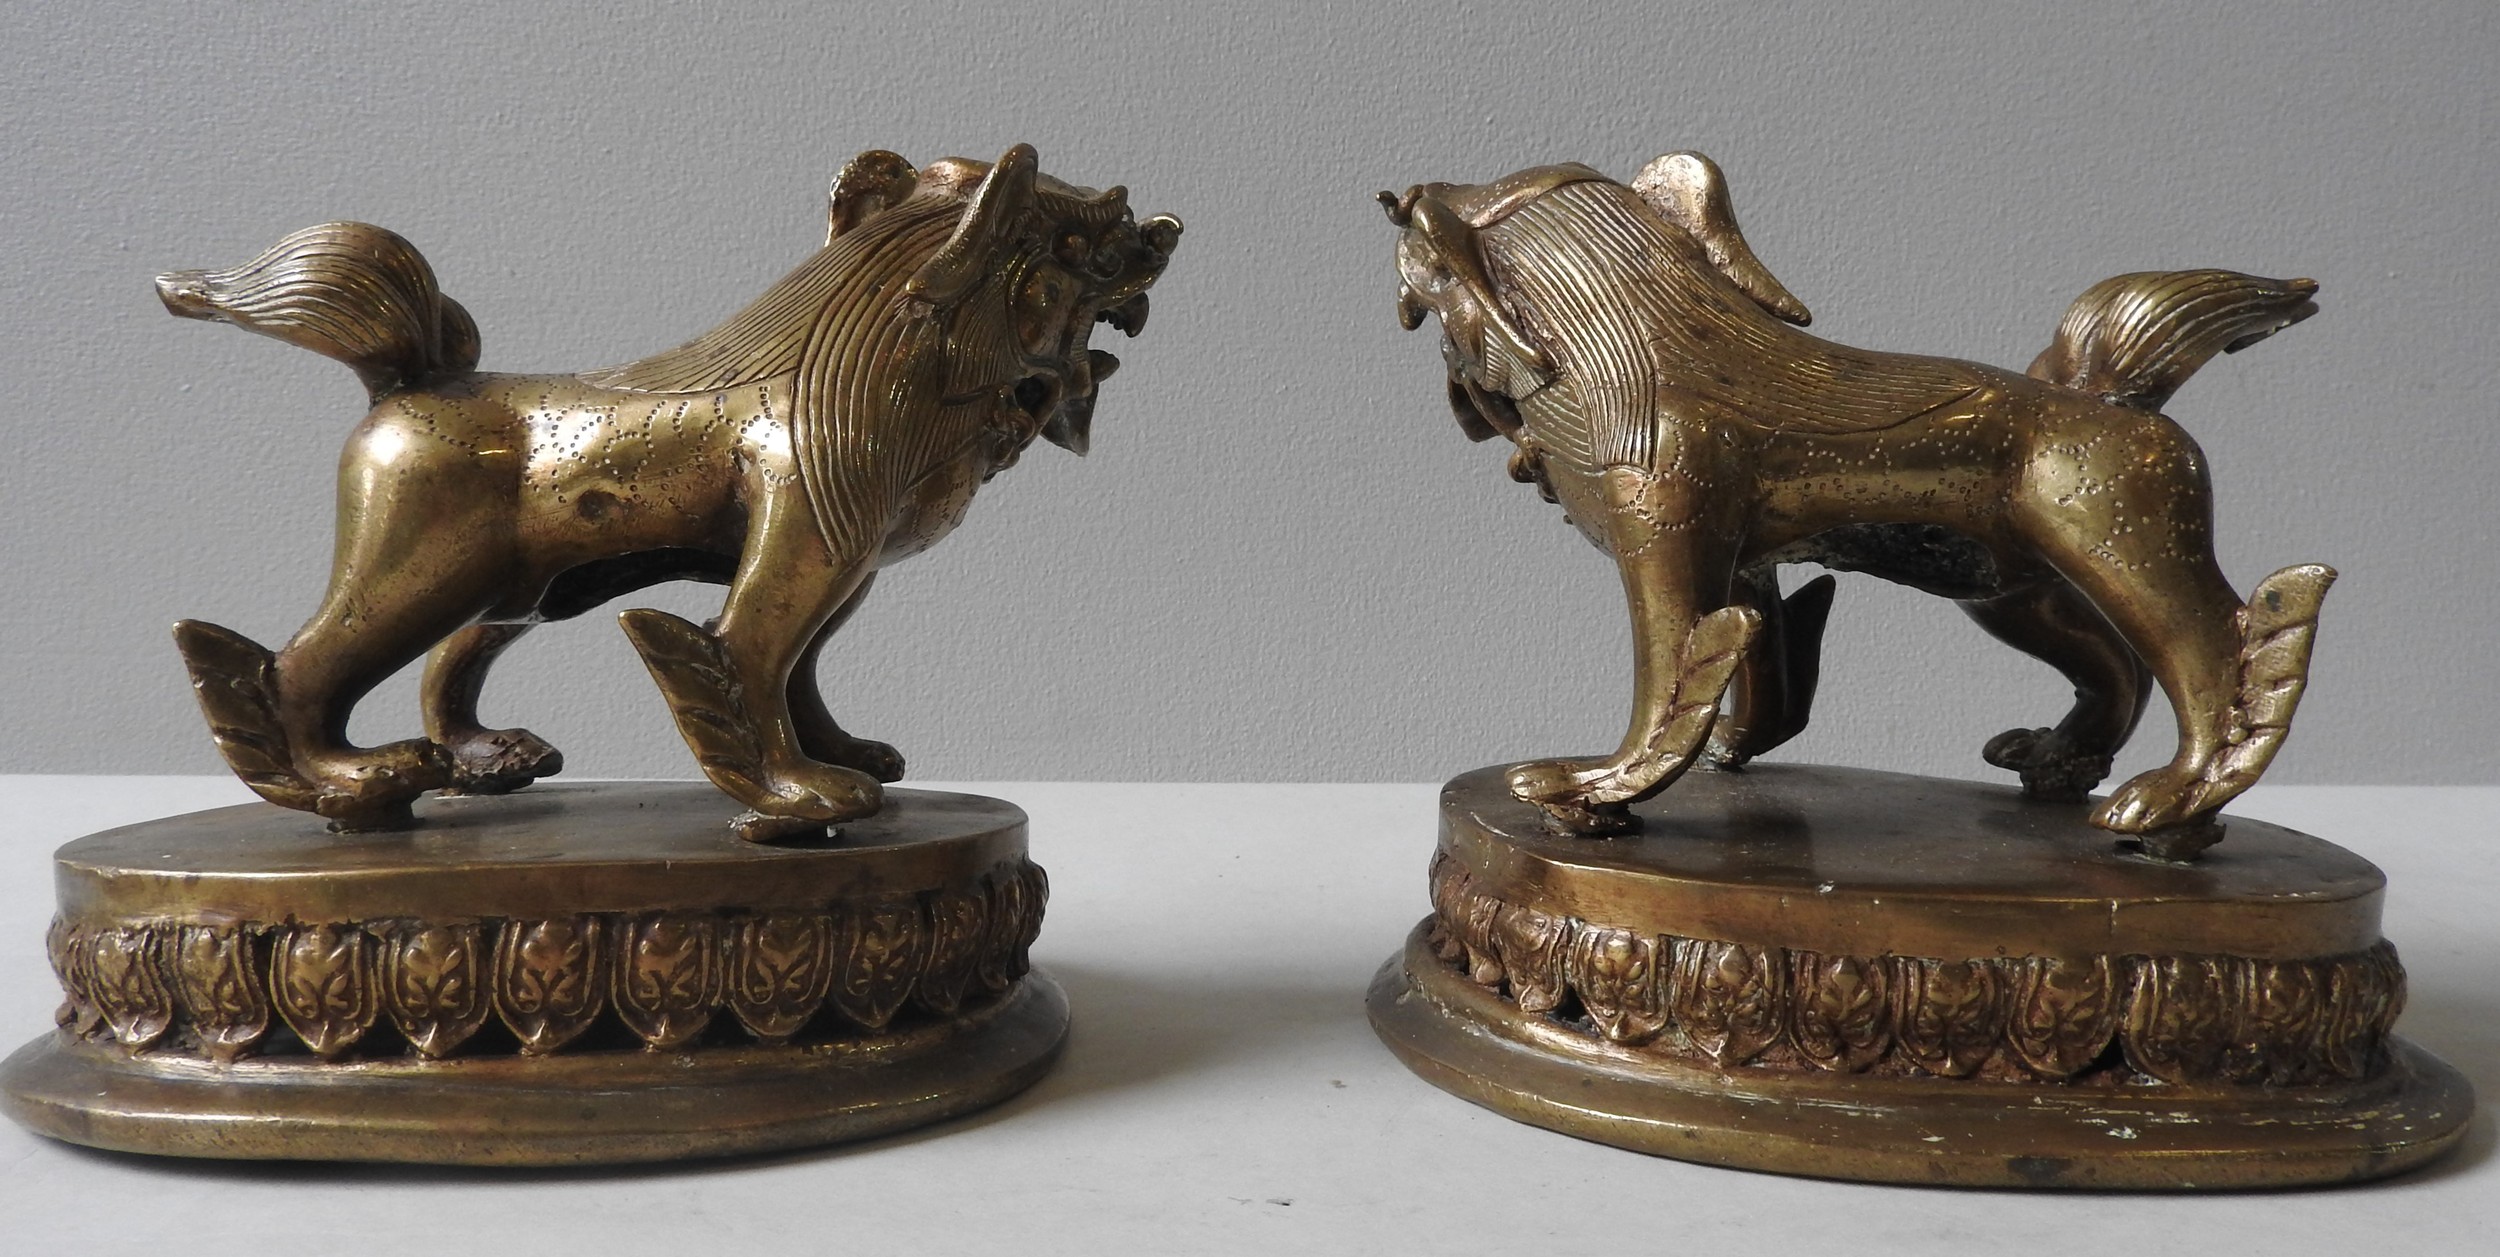 A PAIR OF LAQUERED BRASS CHINESE LIONS, QING DYNASTY, standing foursquare on lotus bases 14 cm high - Image 4 of 4